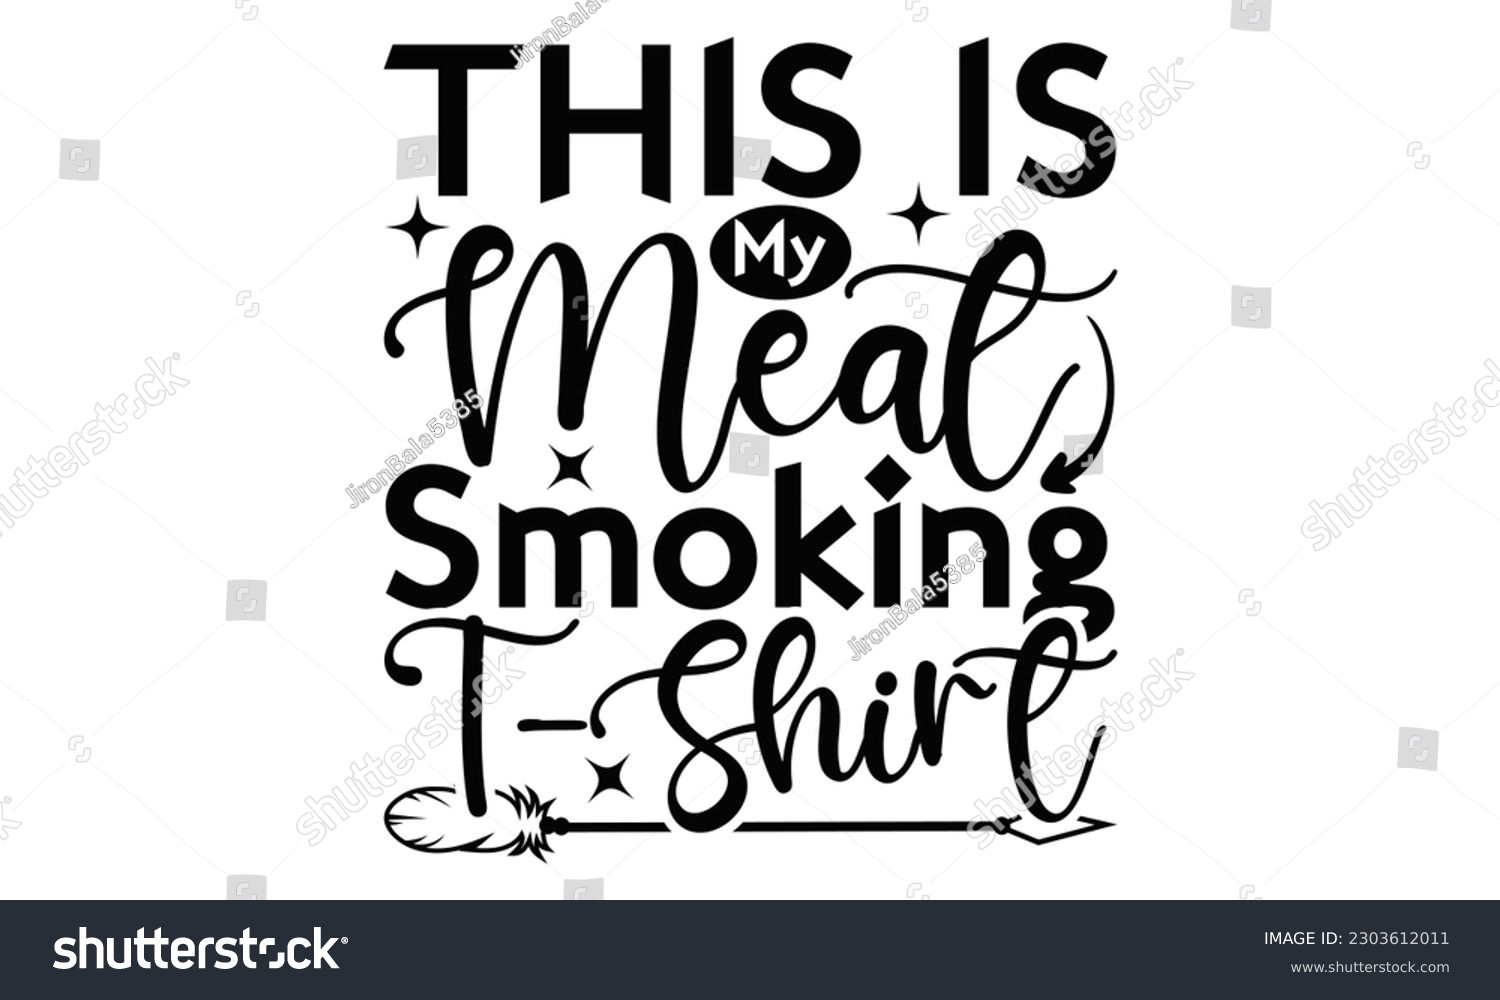 SVG of This Is My Meat Smoking T-Shirt - Barbecue SVG Design, Hand drawn vintage illustration with hand-lettering and decoration element, for prints on t-shirts, bags and Mug.
 svg